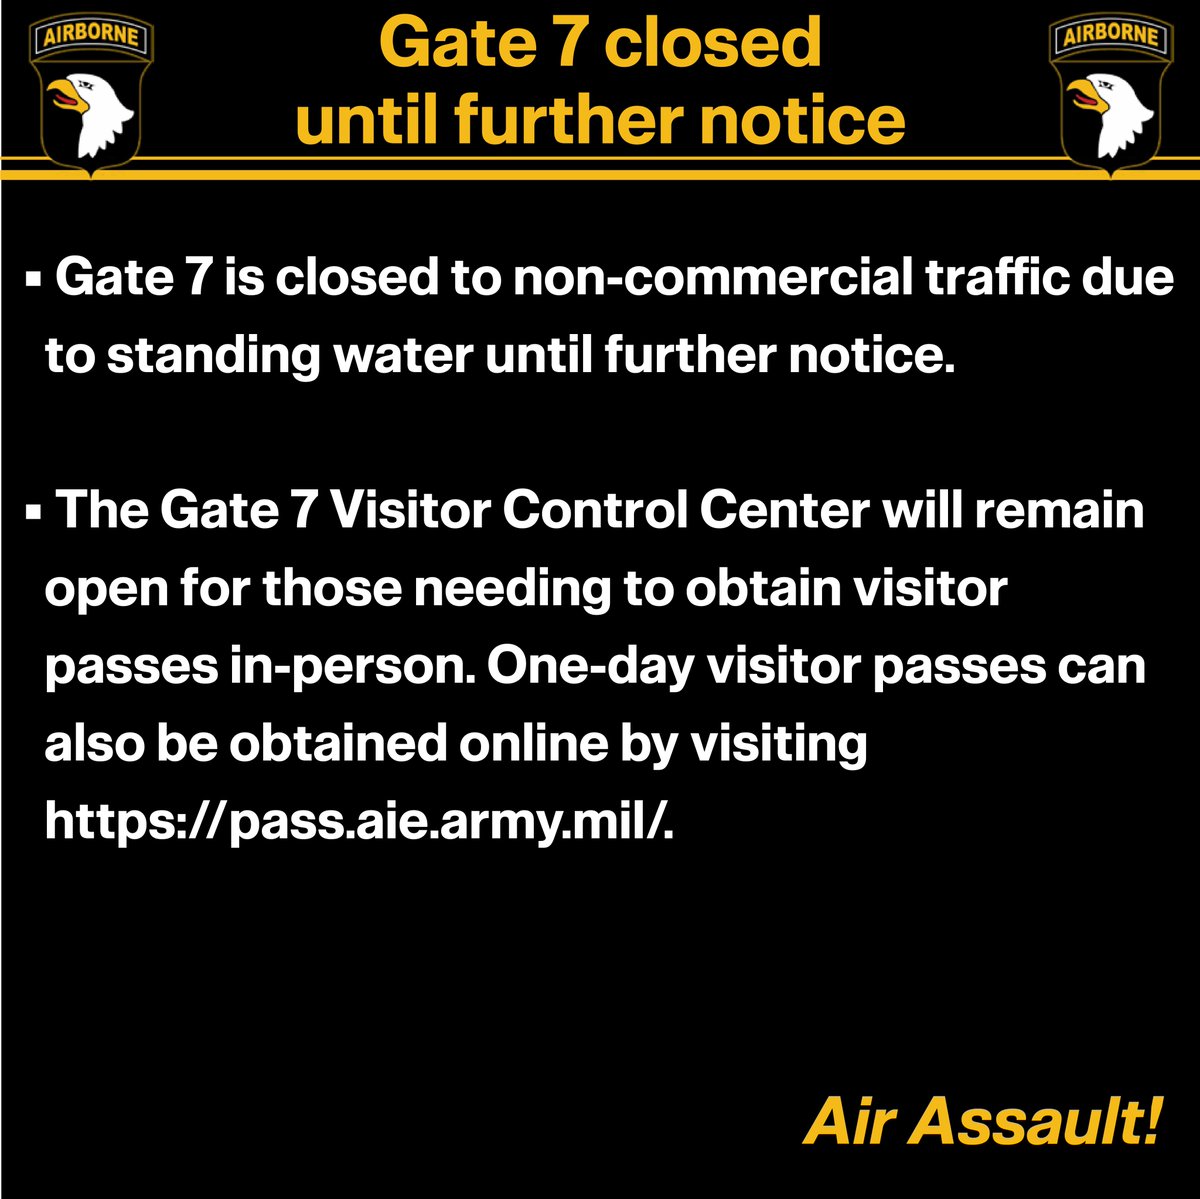 The Gate 7 Visitor Control Center will remain open for those needing to obtain visitor passes in-person. One-day visitor passes can also be obtained online by visiting pass.aie.army.mil. @FortCampbell